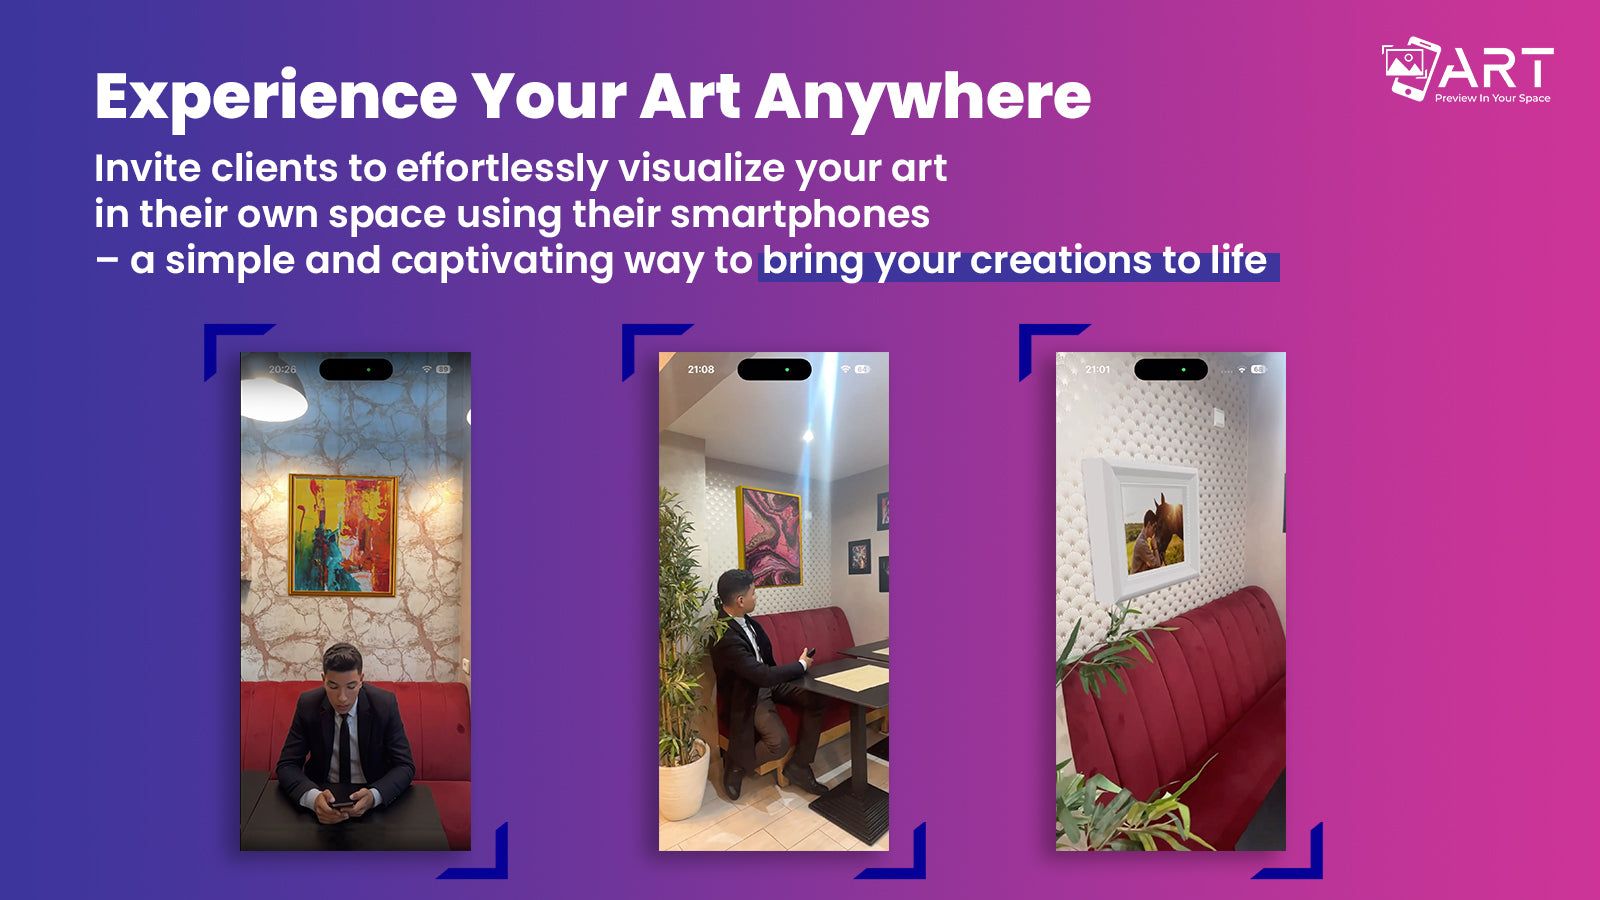 Experience your art anywhere